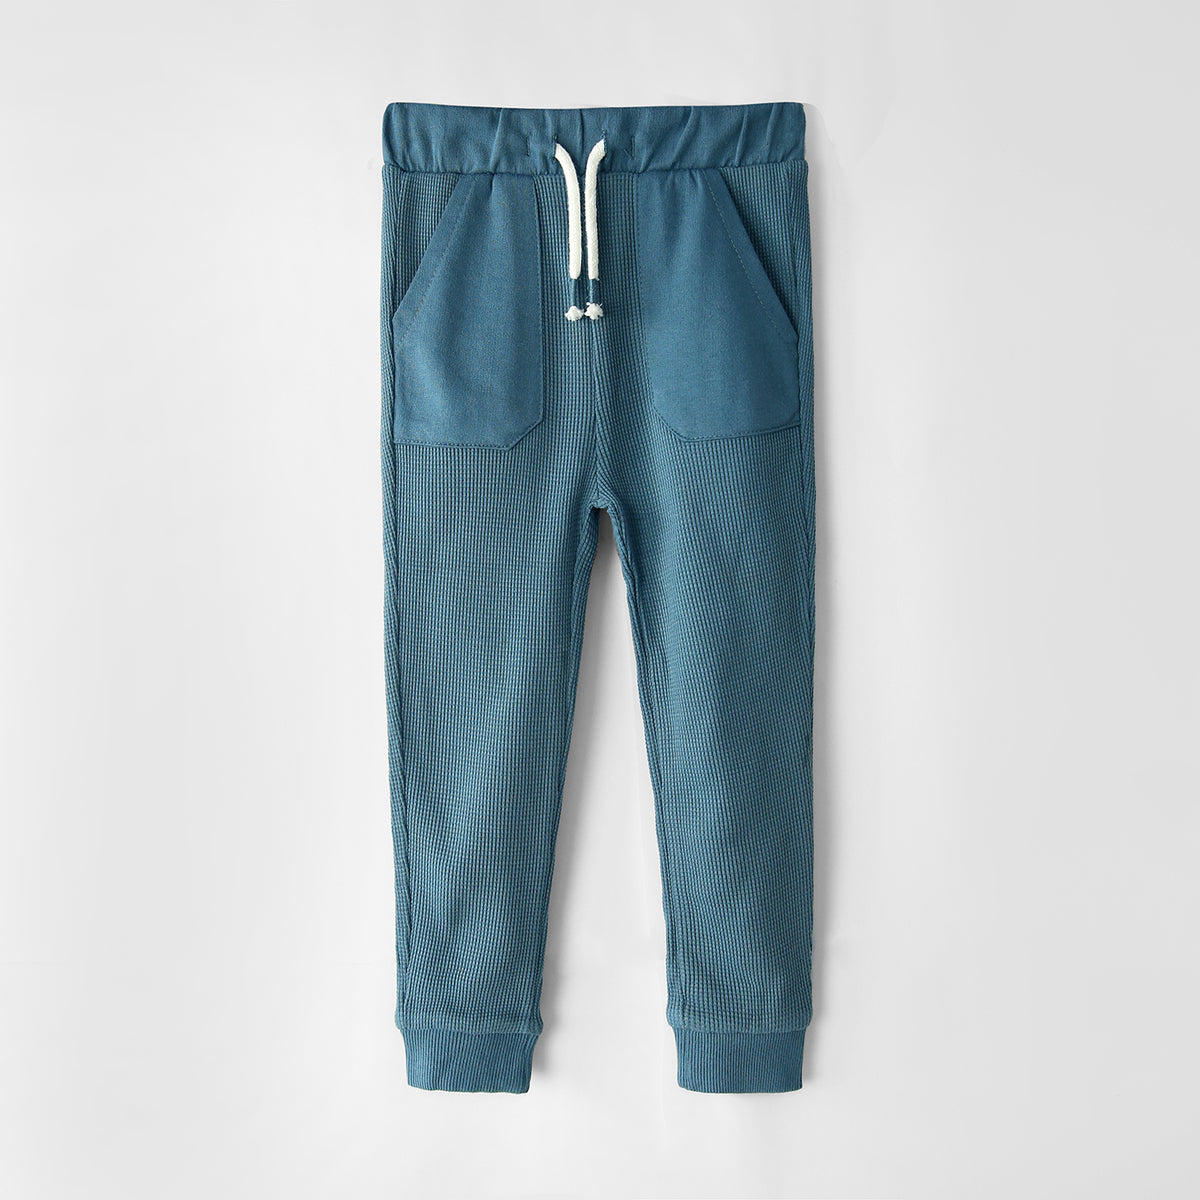 Premium Quality Soft Cotton Thermal Joggers For Kids